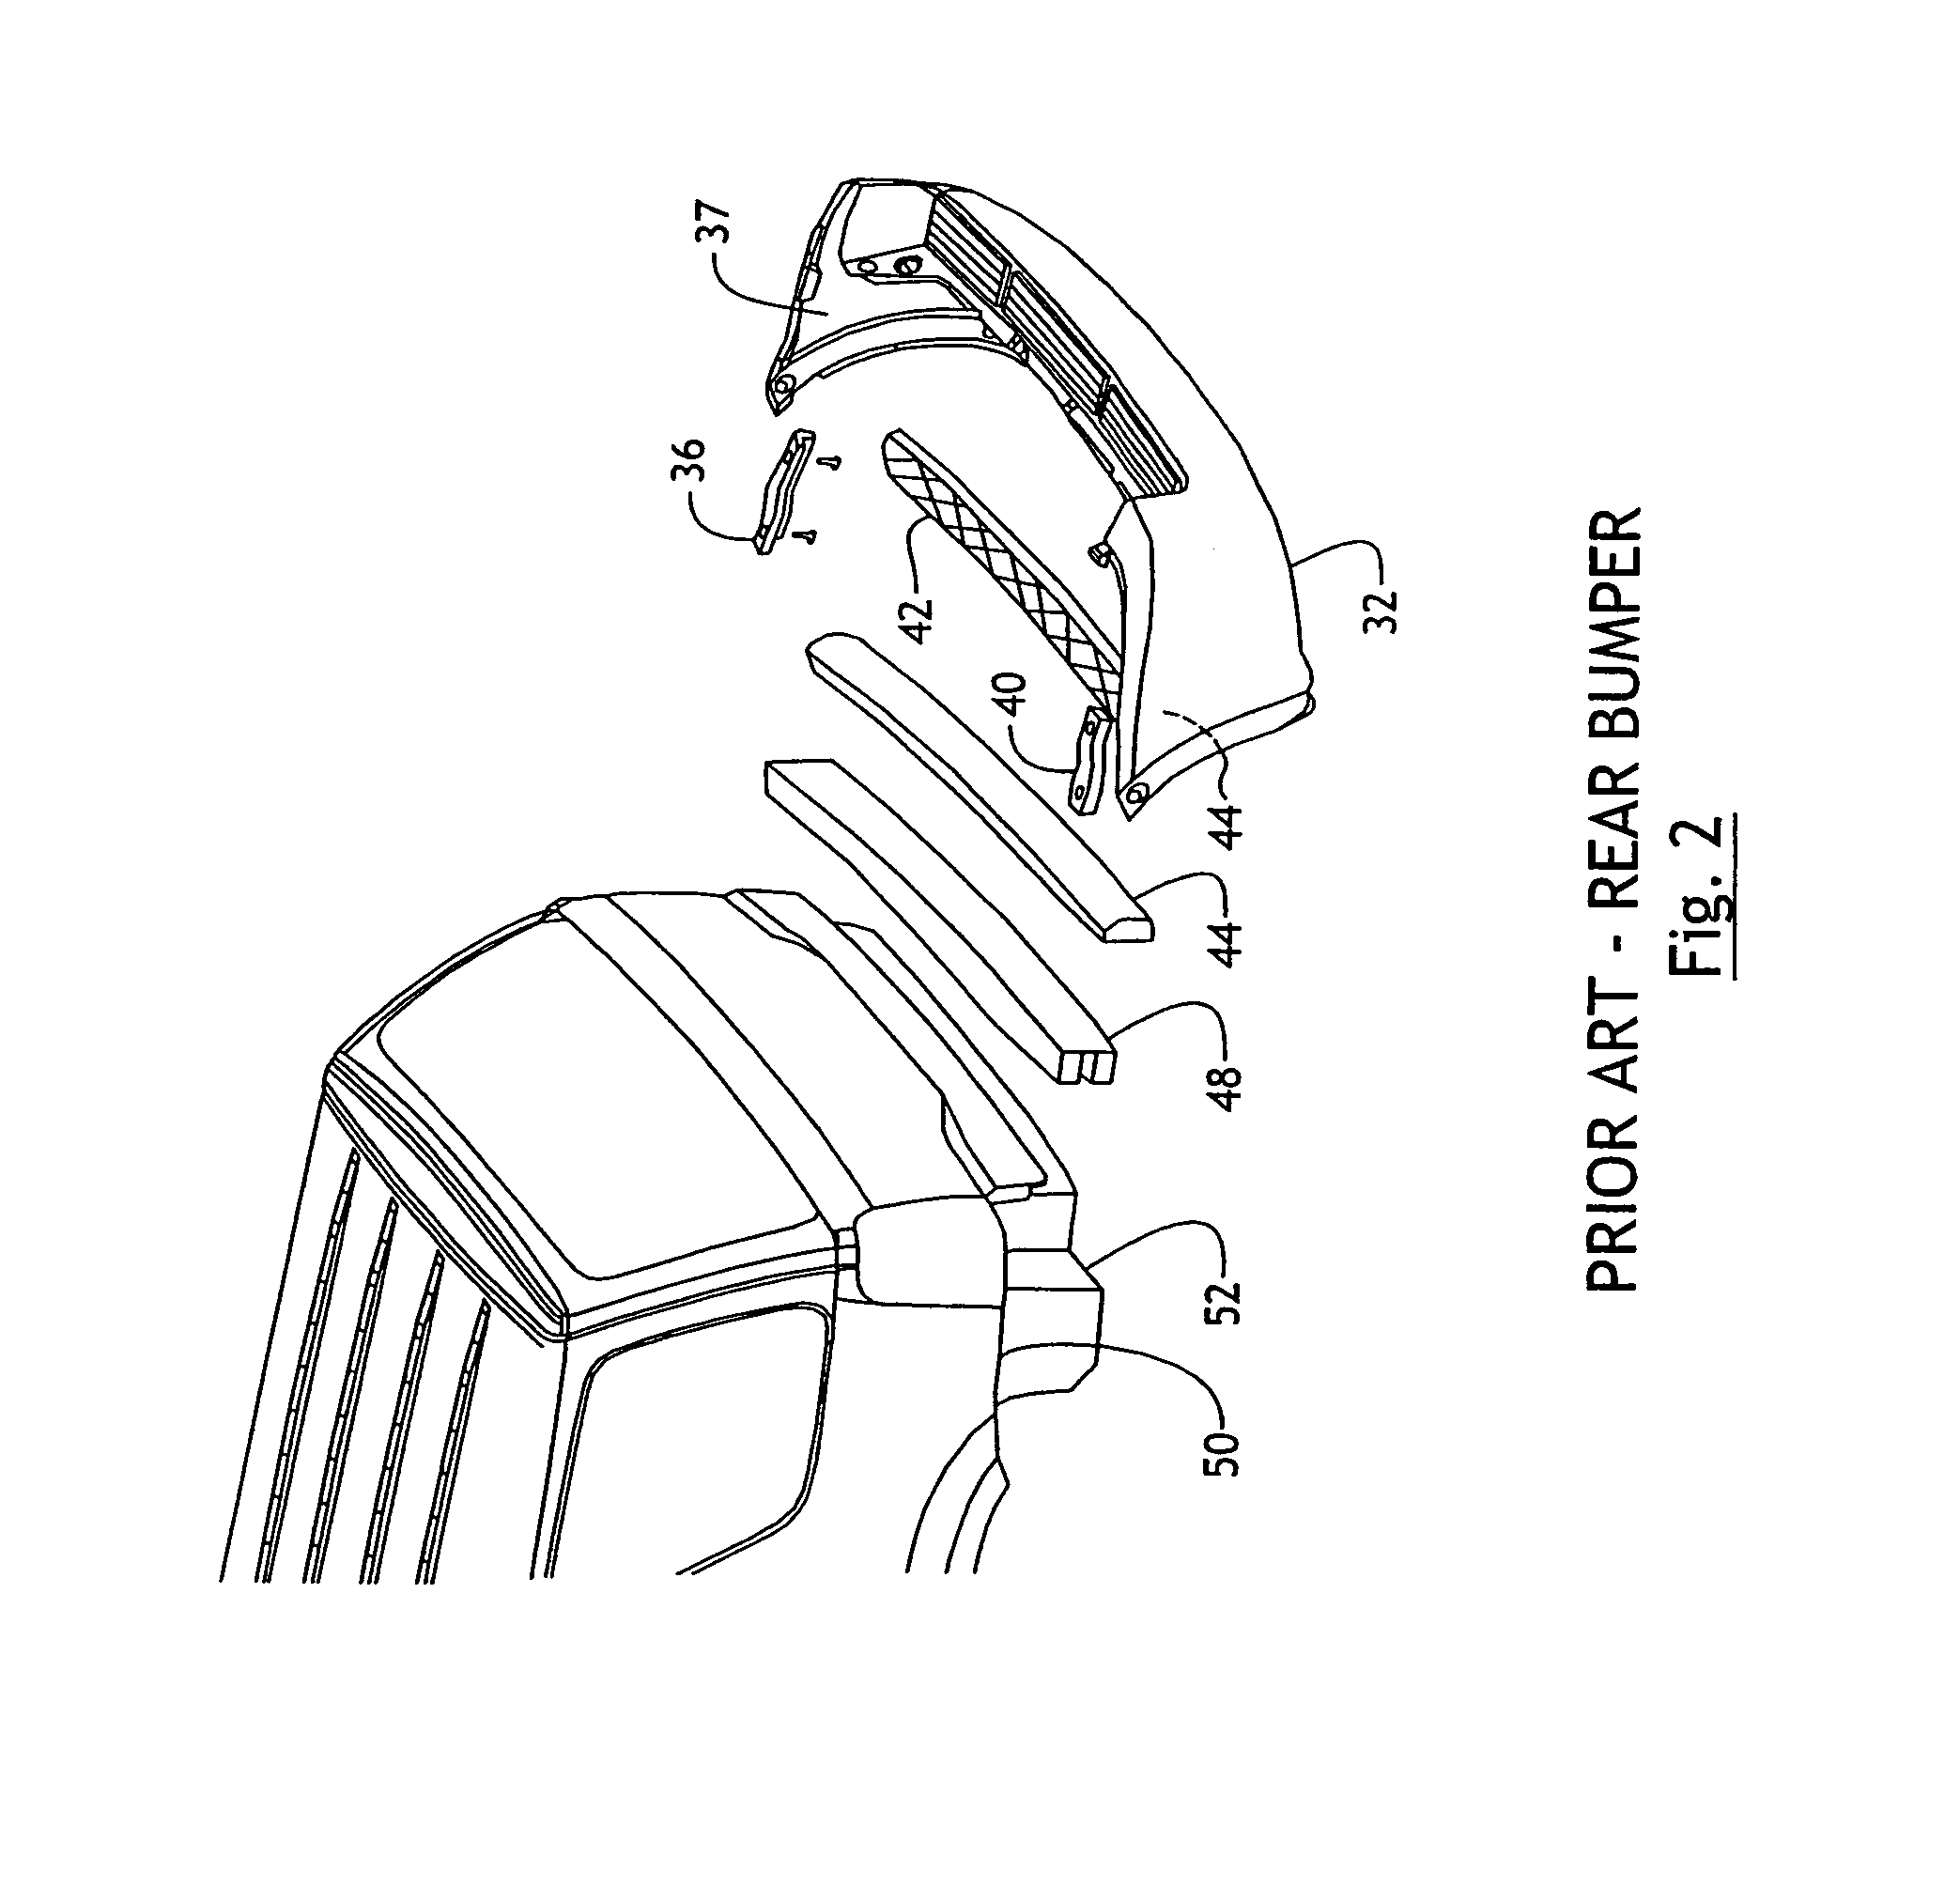 Integrated co-injection molded vehicle components and methods of making the same